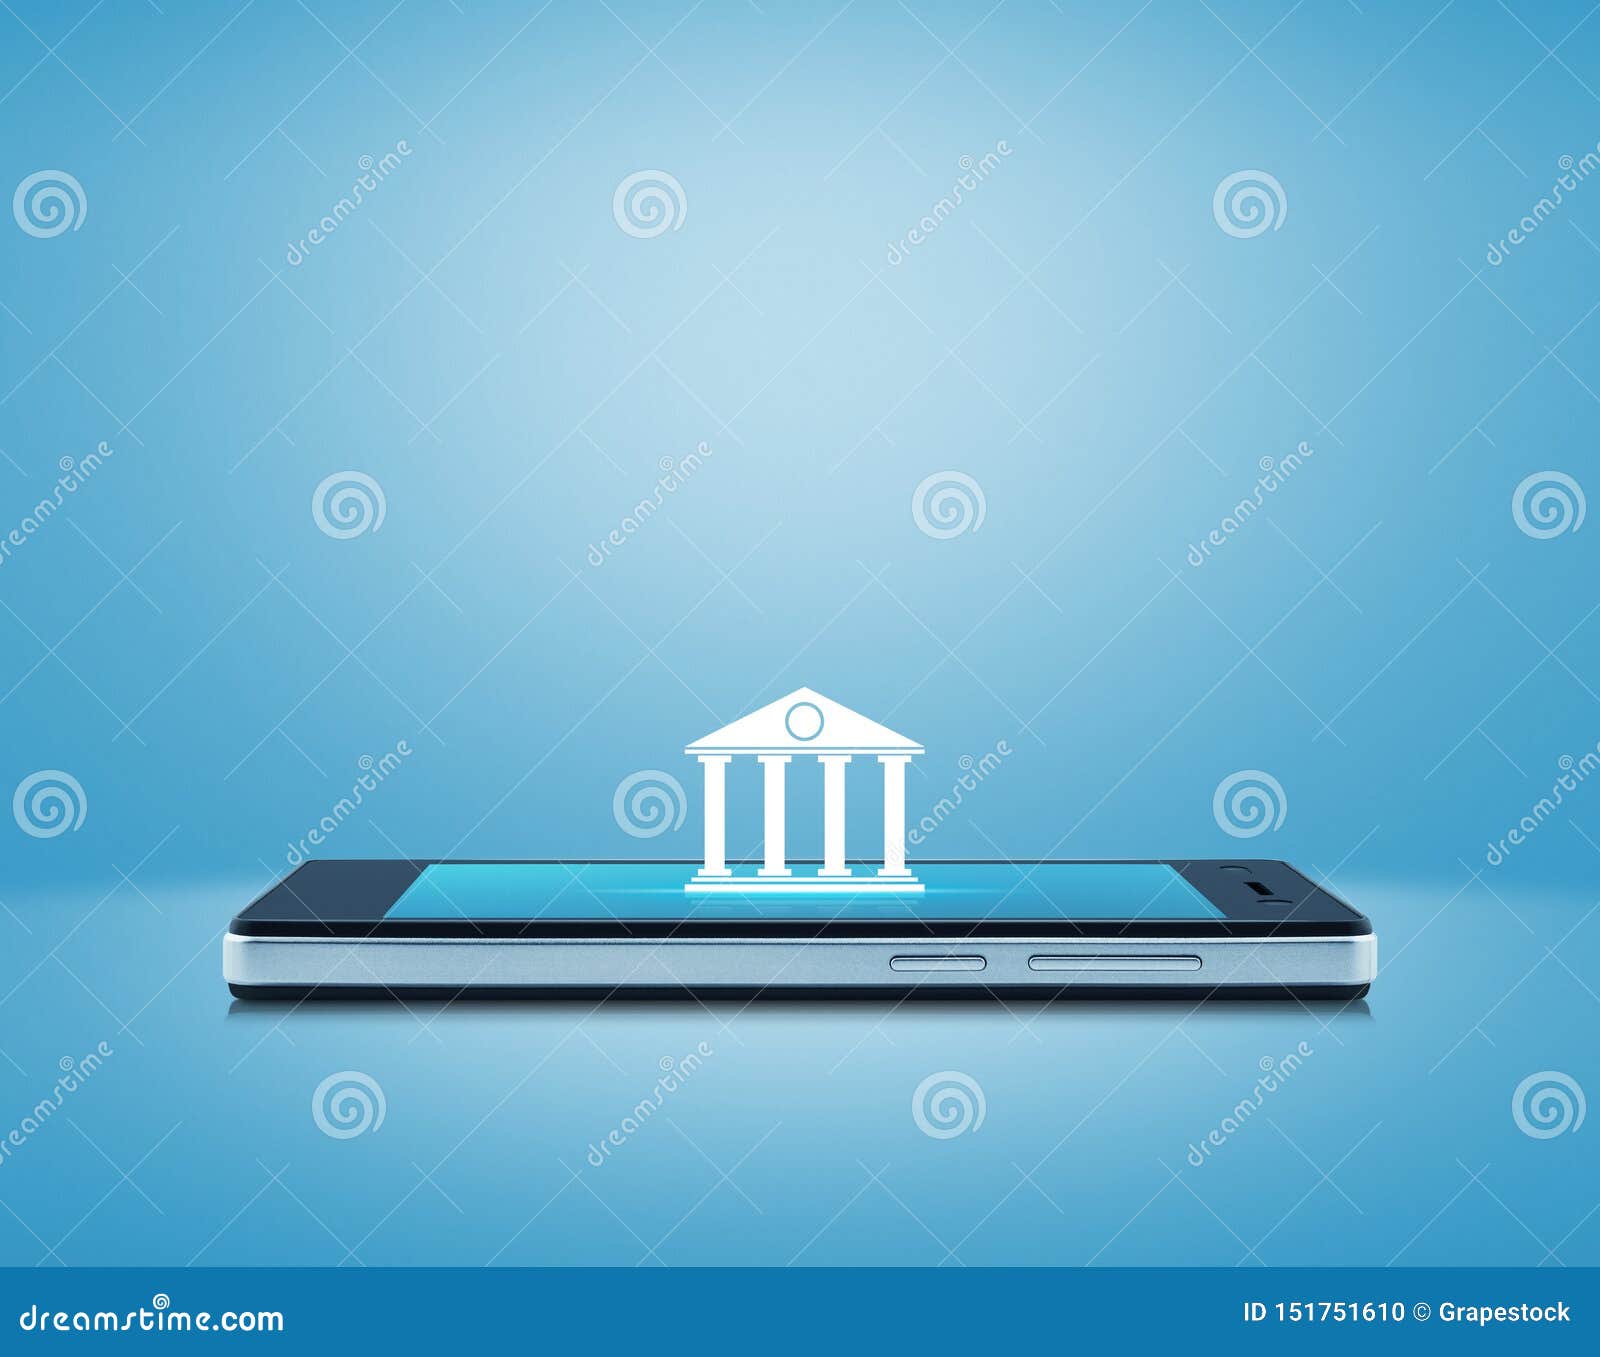 Mobile banking concept stock photo. Image of investment - 151751610